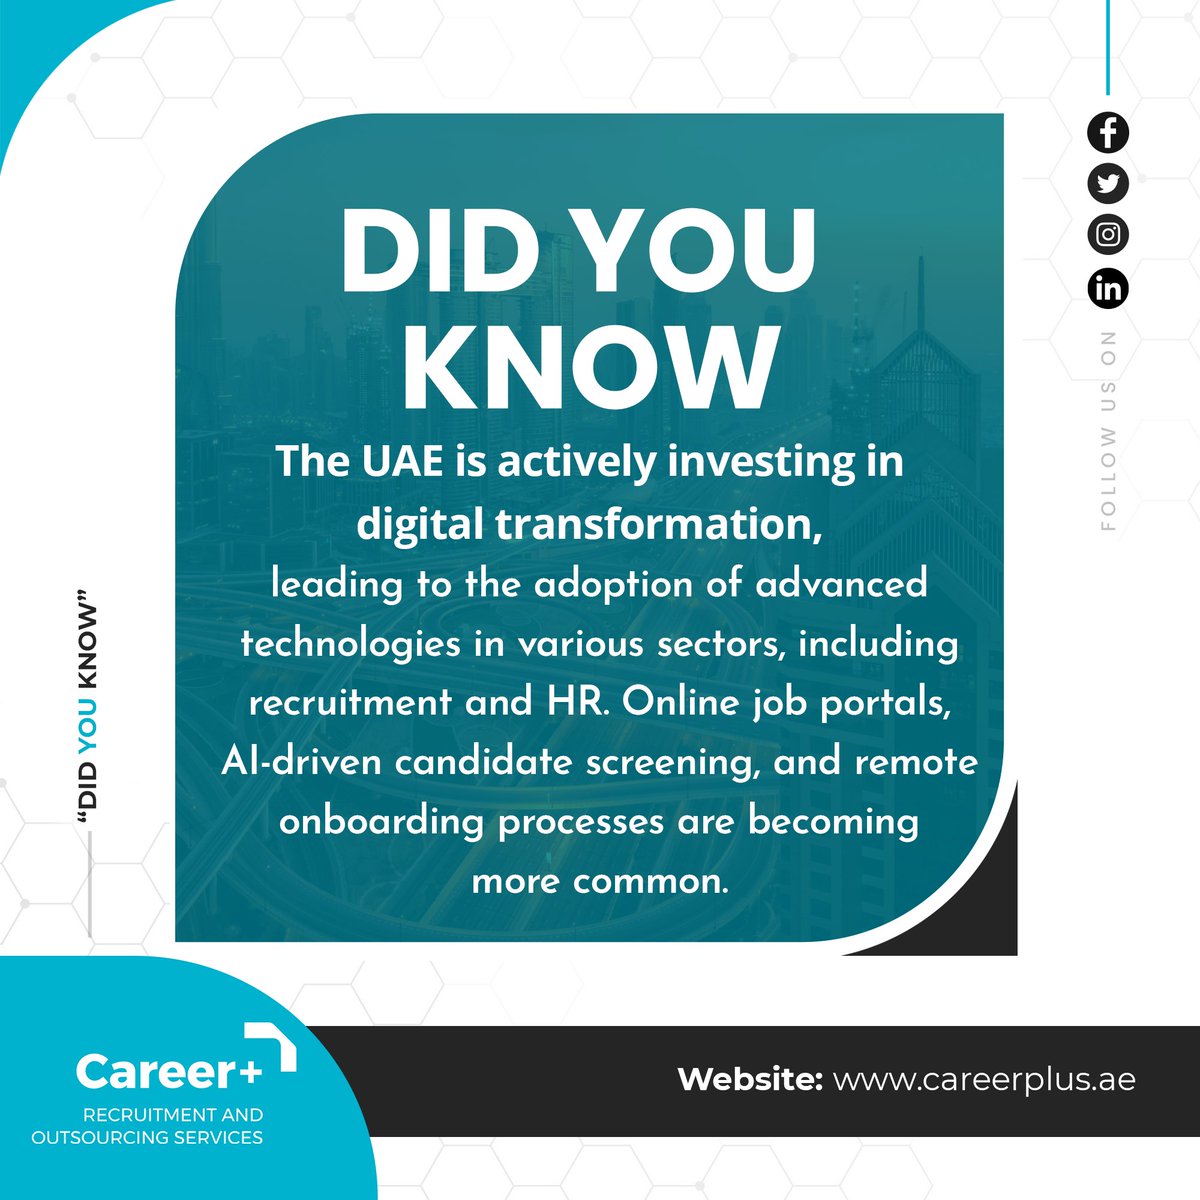 The recruitment process has become more powerful and easy with AI and we are constantly in the urge to learn and be the best in the field.
.
.
.
#CareerPlus #recruitementagency #recruitementagencyuae